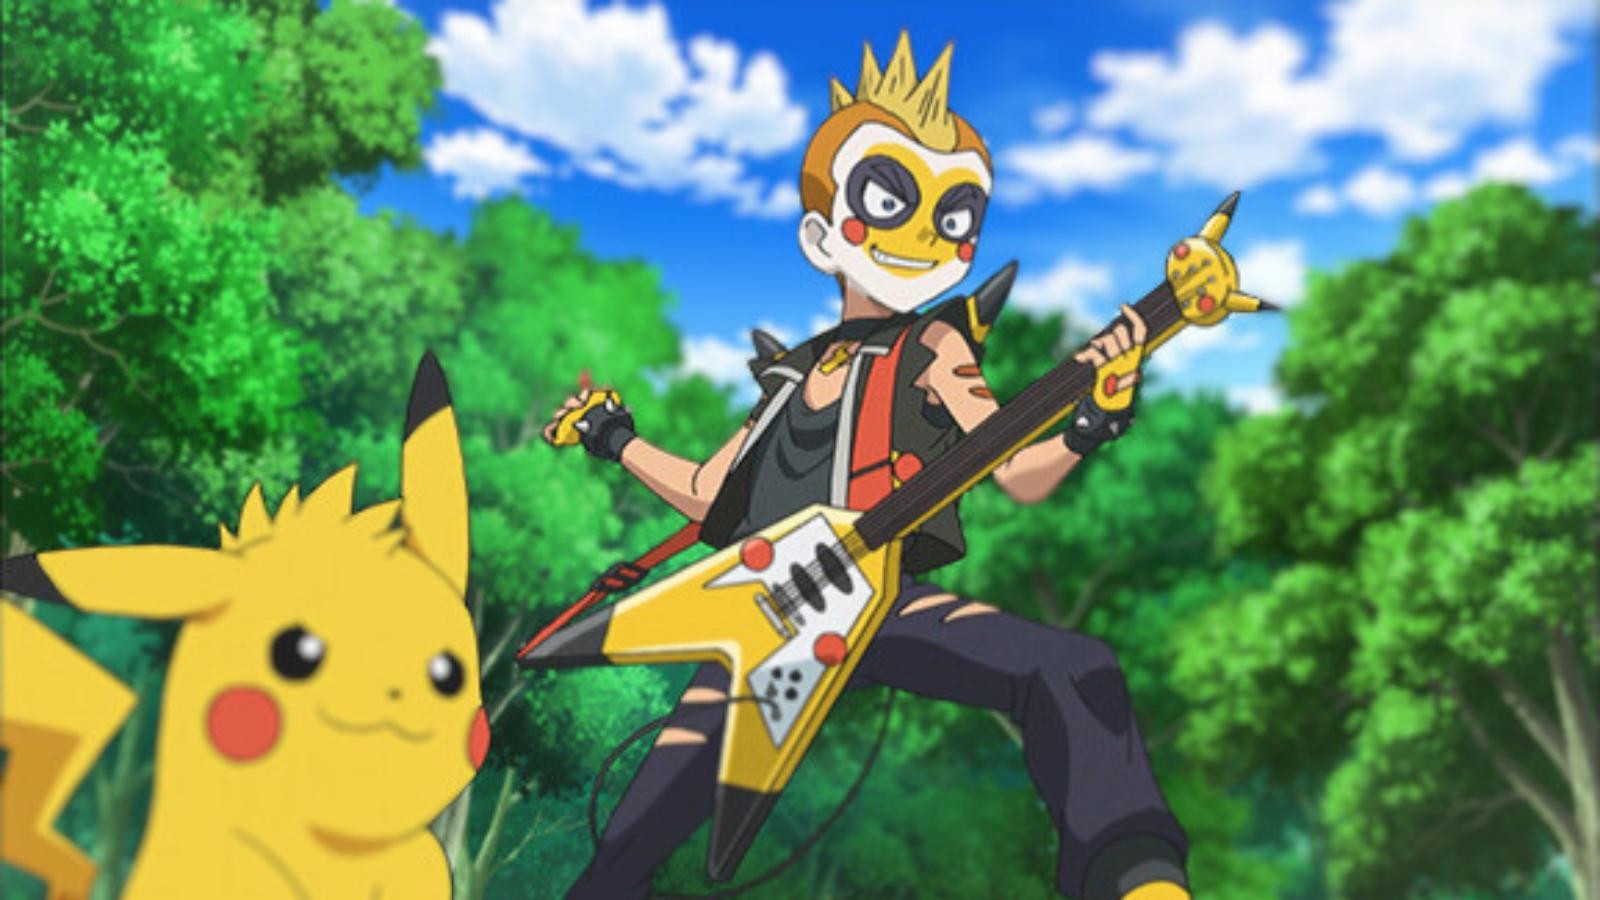 Pokemon character holding a guitar with a Pikachu next to him